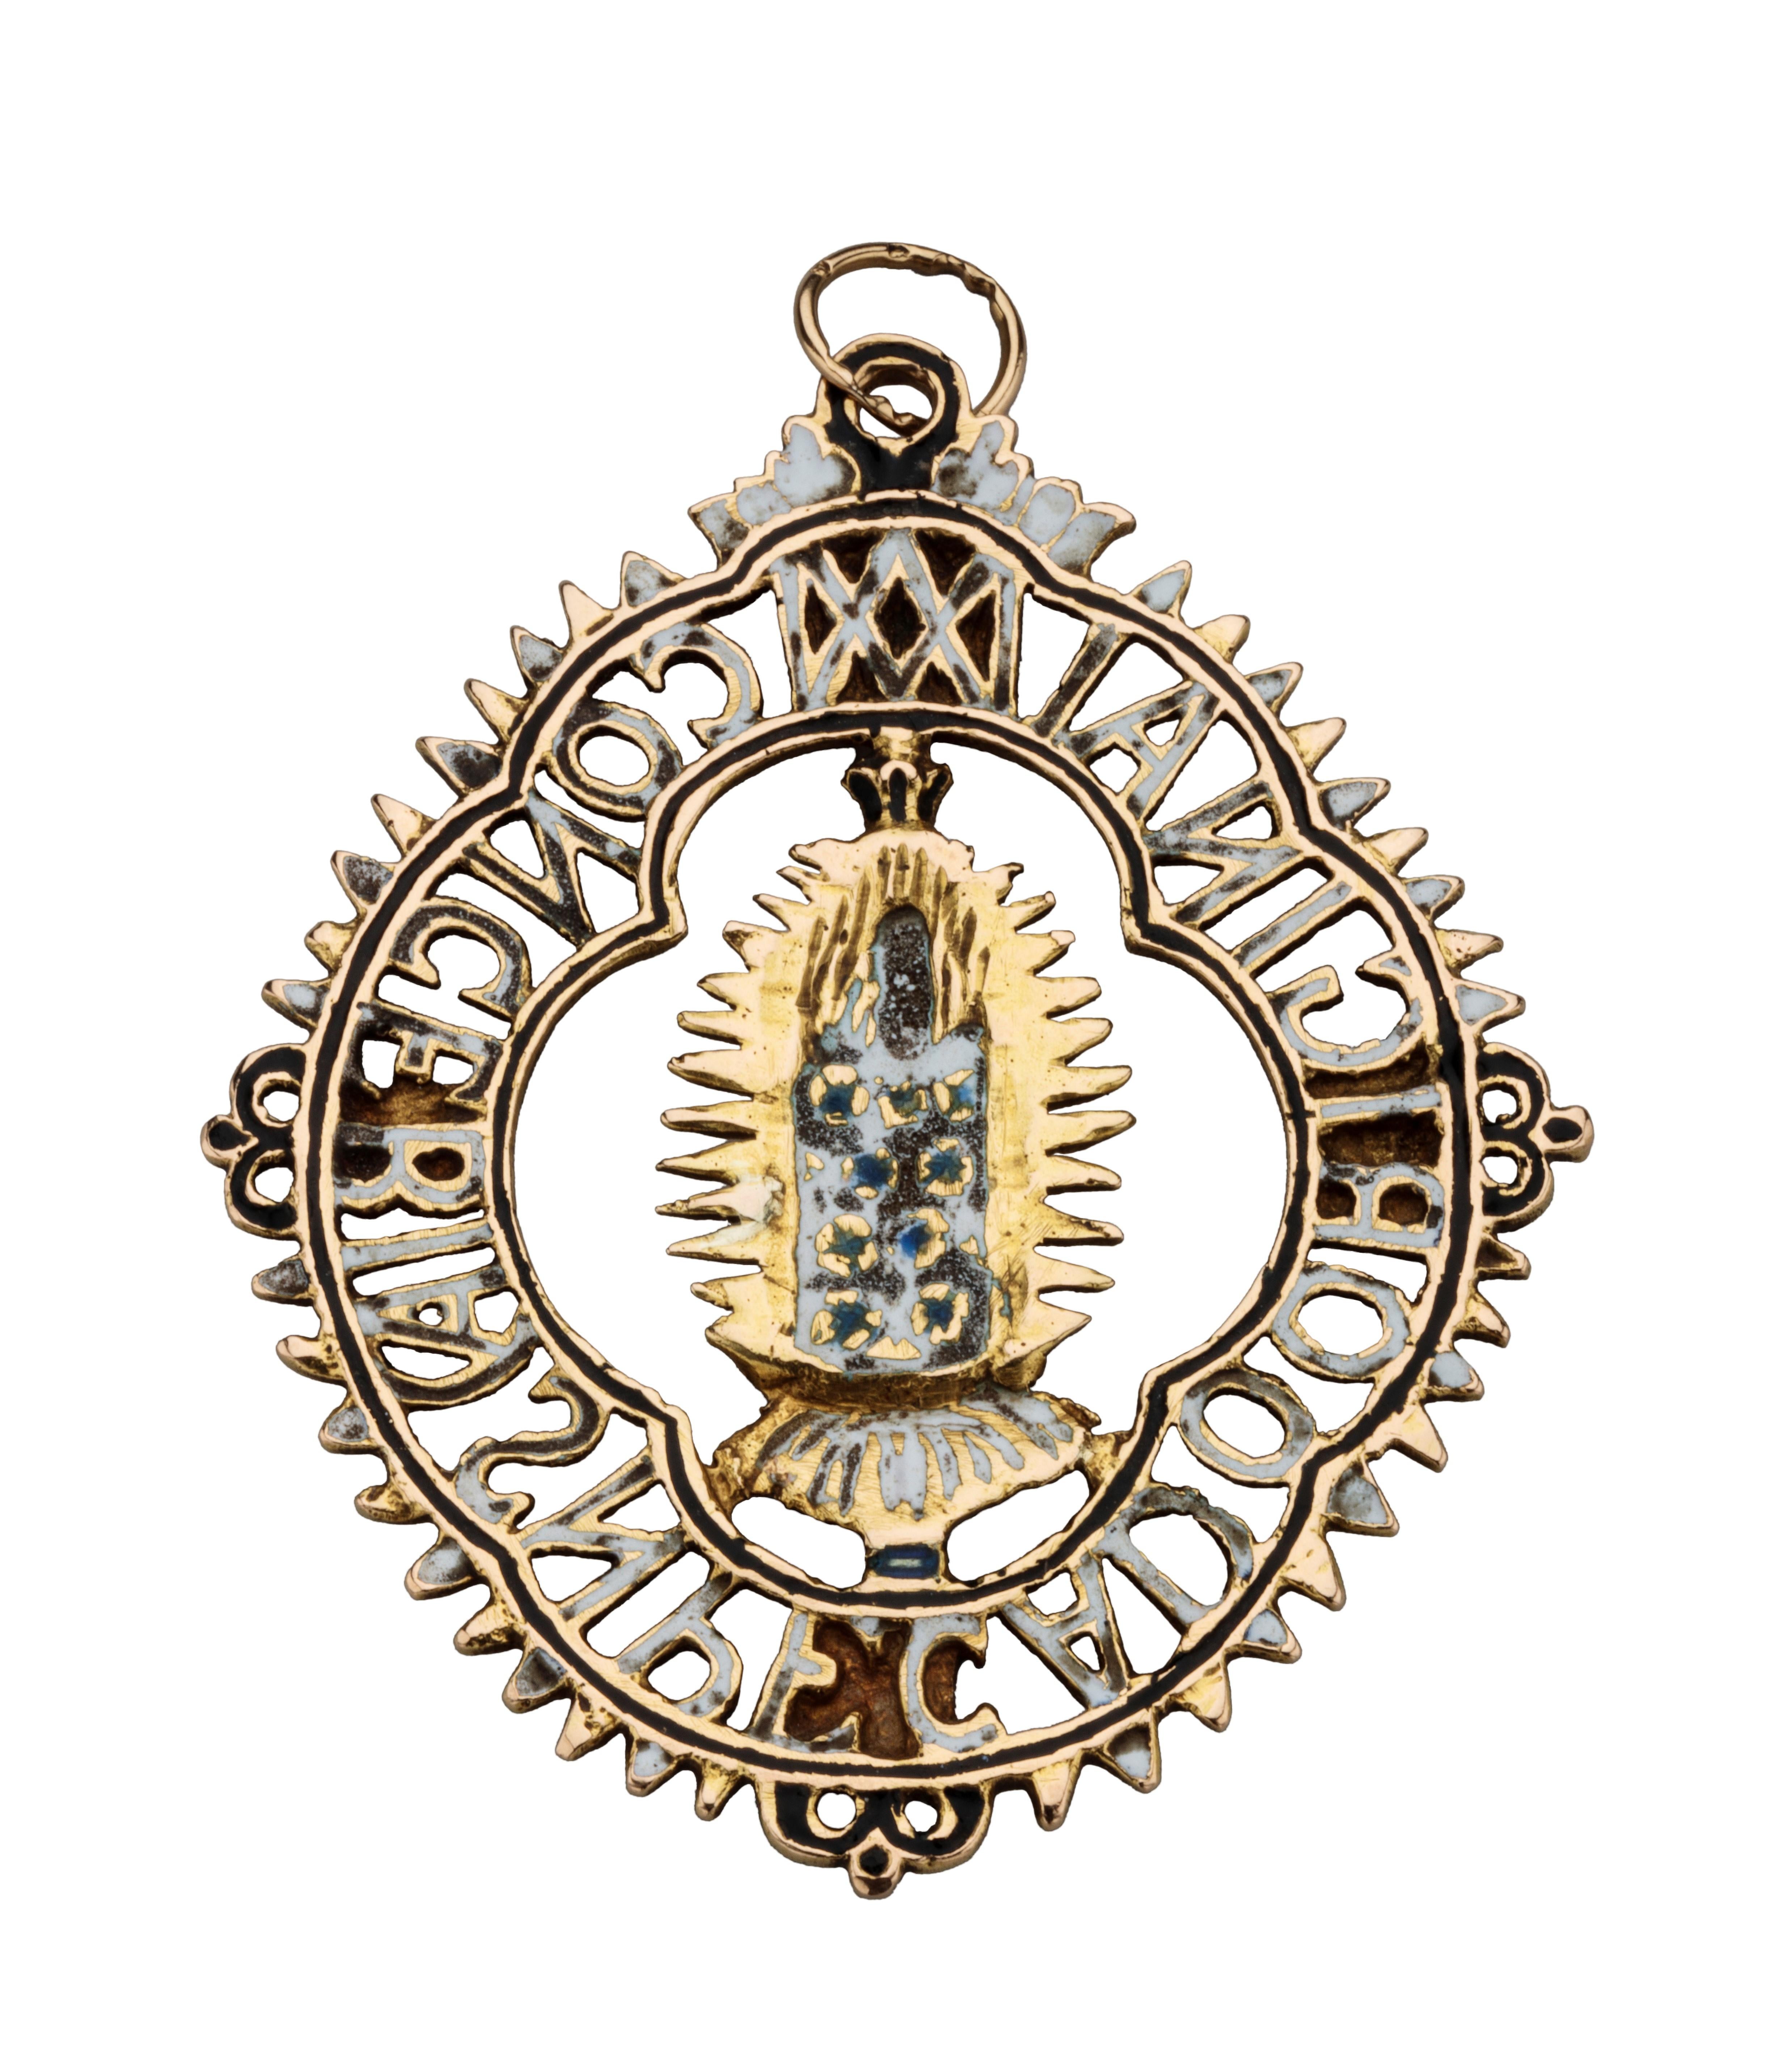 PENDANT WITH VIRGIN OF THE IMMACULATE CONCEPTION 
Spain (Andalucia or Estremadura), c. 1630 
Gold, enamel, paste 
Weight 35 grams; dimensions 74 × 57 × 3 mm 

Openwork gold pendant with quatrefoil frame in black and white enamel with Spanish